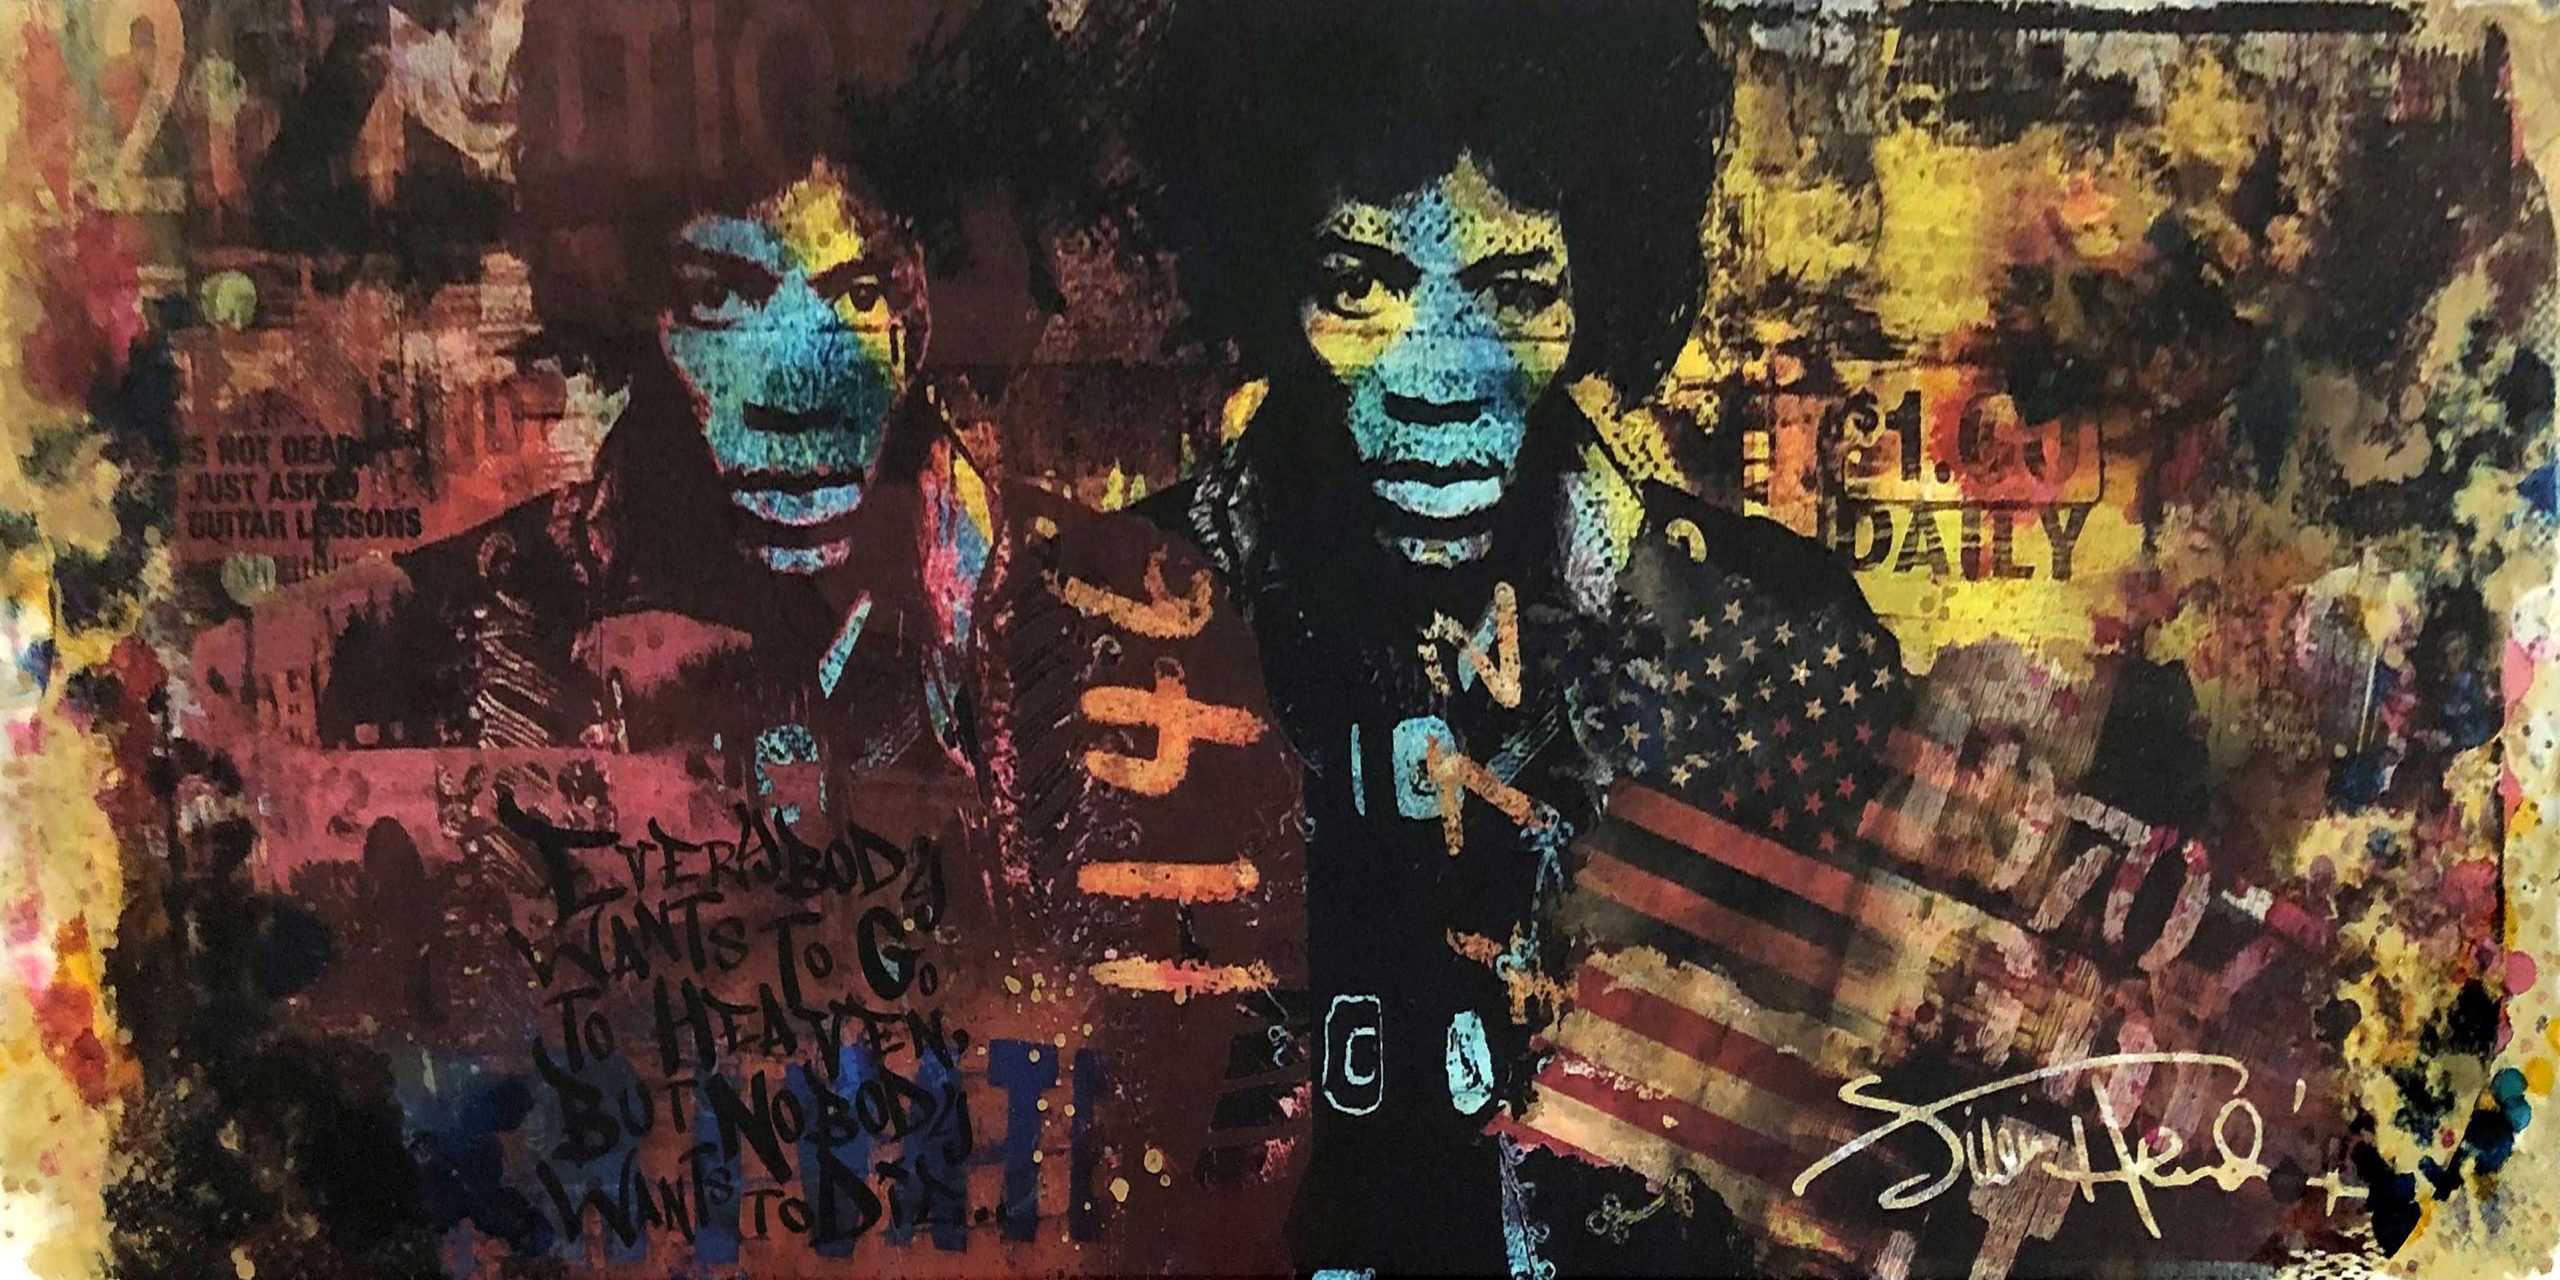 Jimmy Hendrix, Artwork by James Chiew, Galeria HMH, Art Gallery